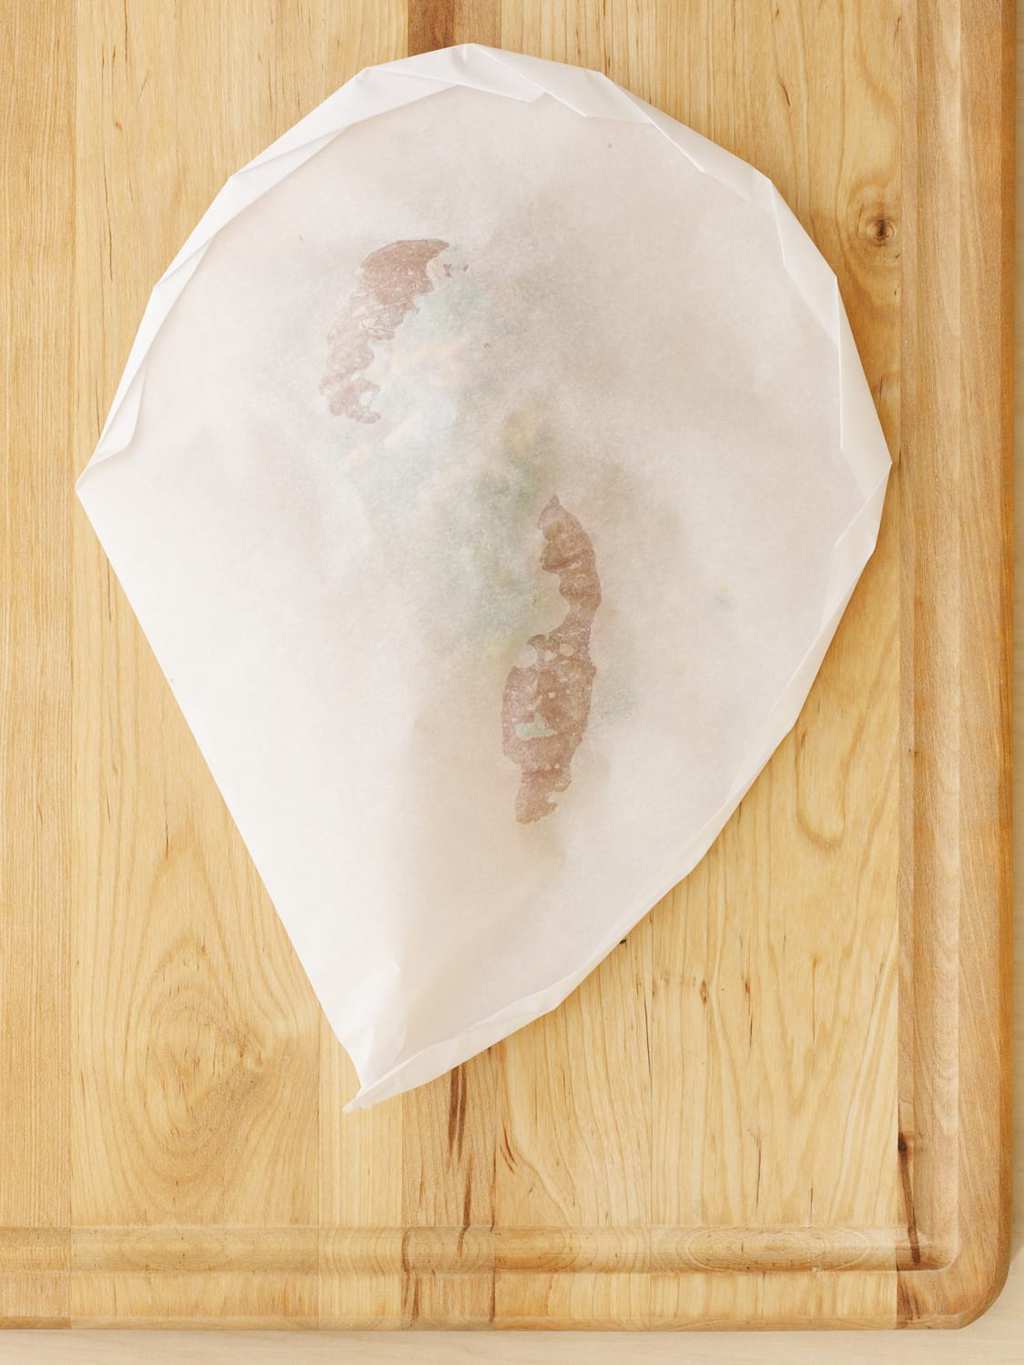 baked chicken in paper en papillote